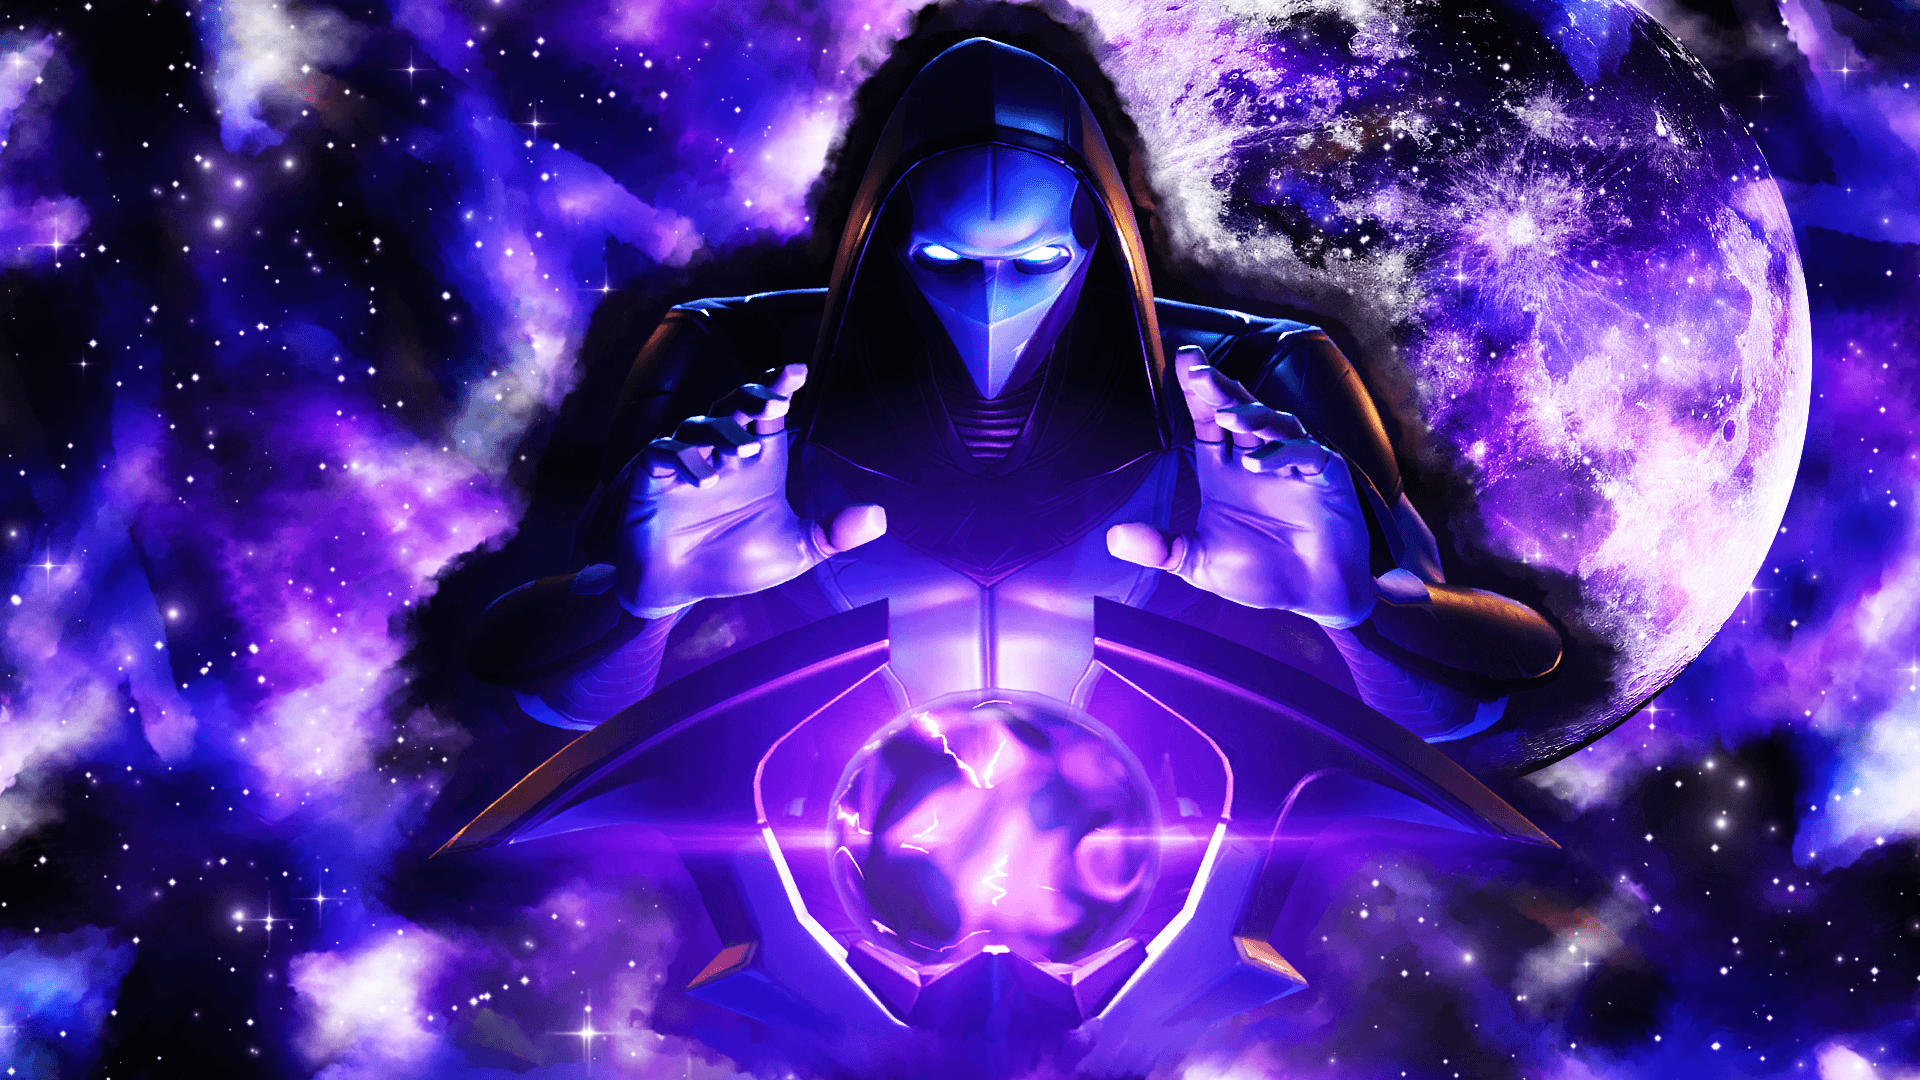 HD Fortnite Omen Game Art by jornix Wallpapers and Free Stock